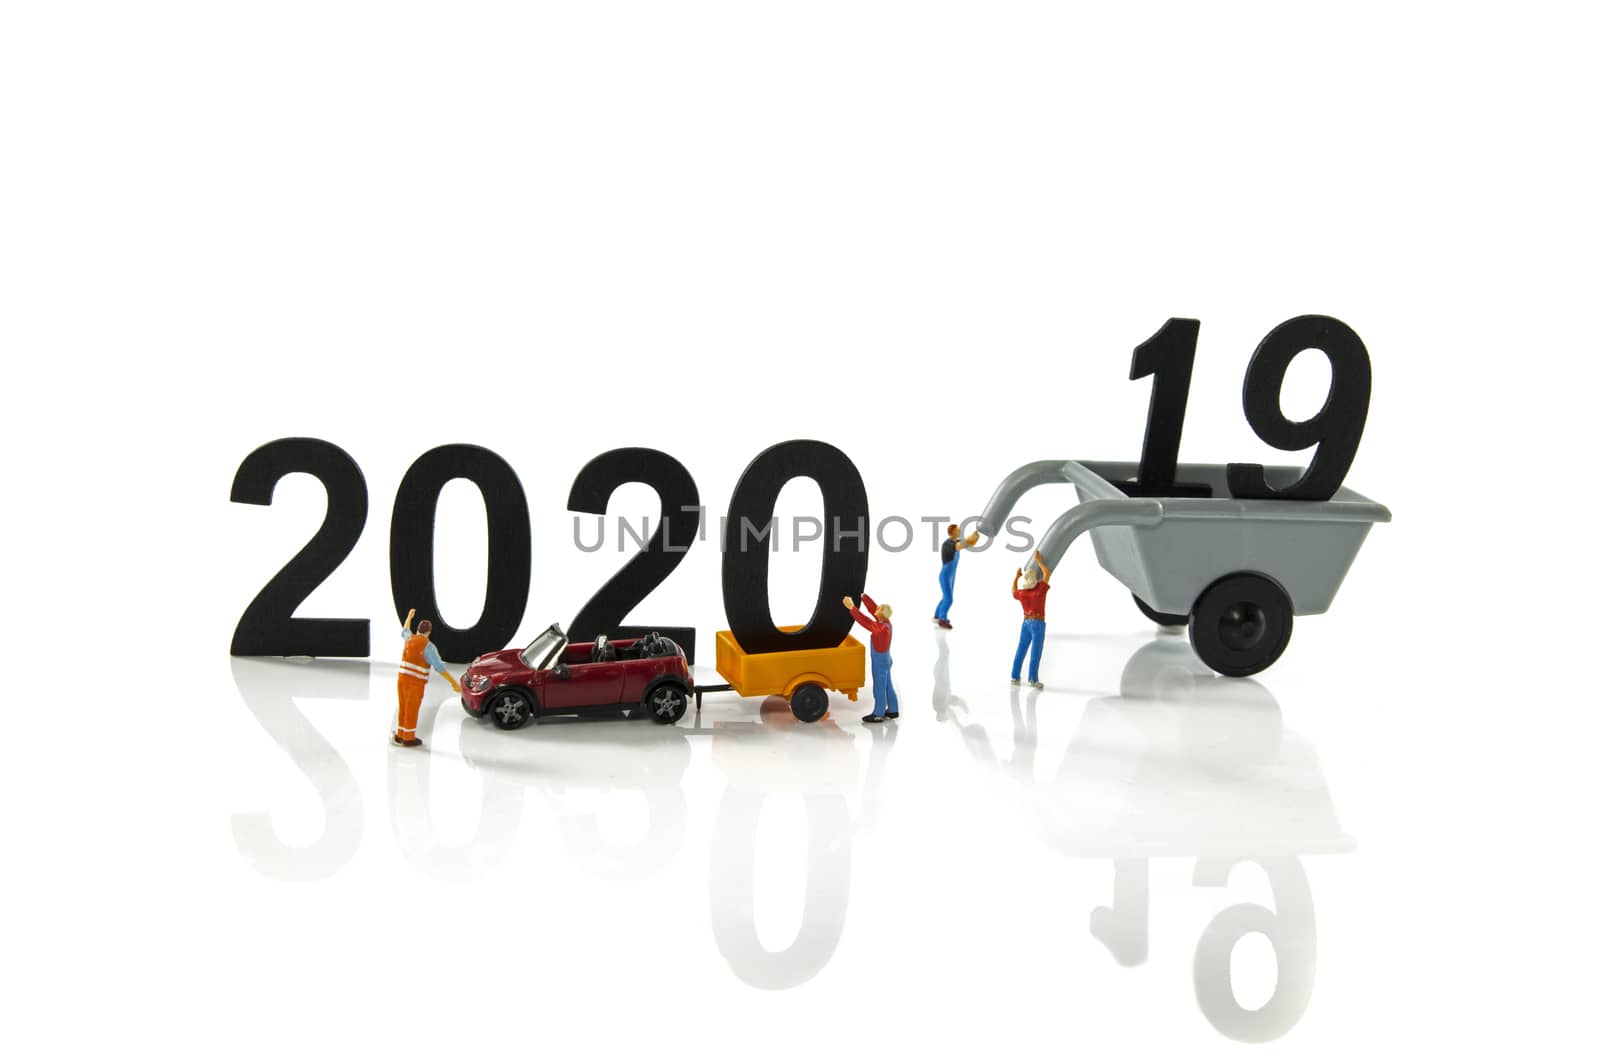 little people working at the new 2020 and remove the 2019 letters